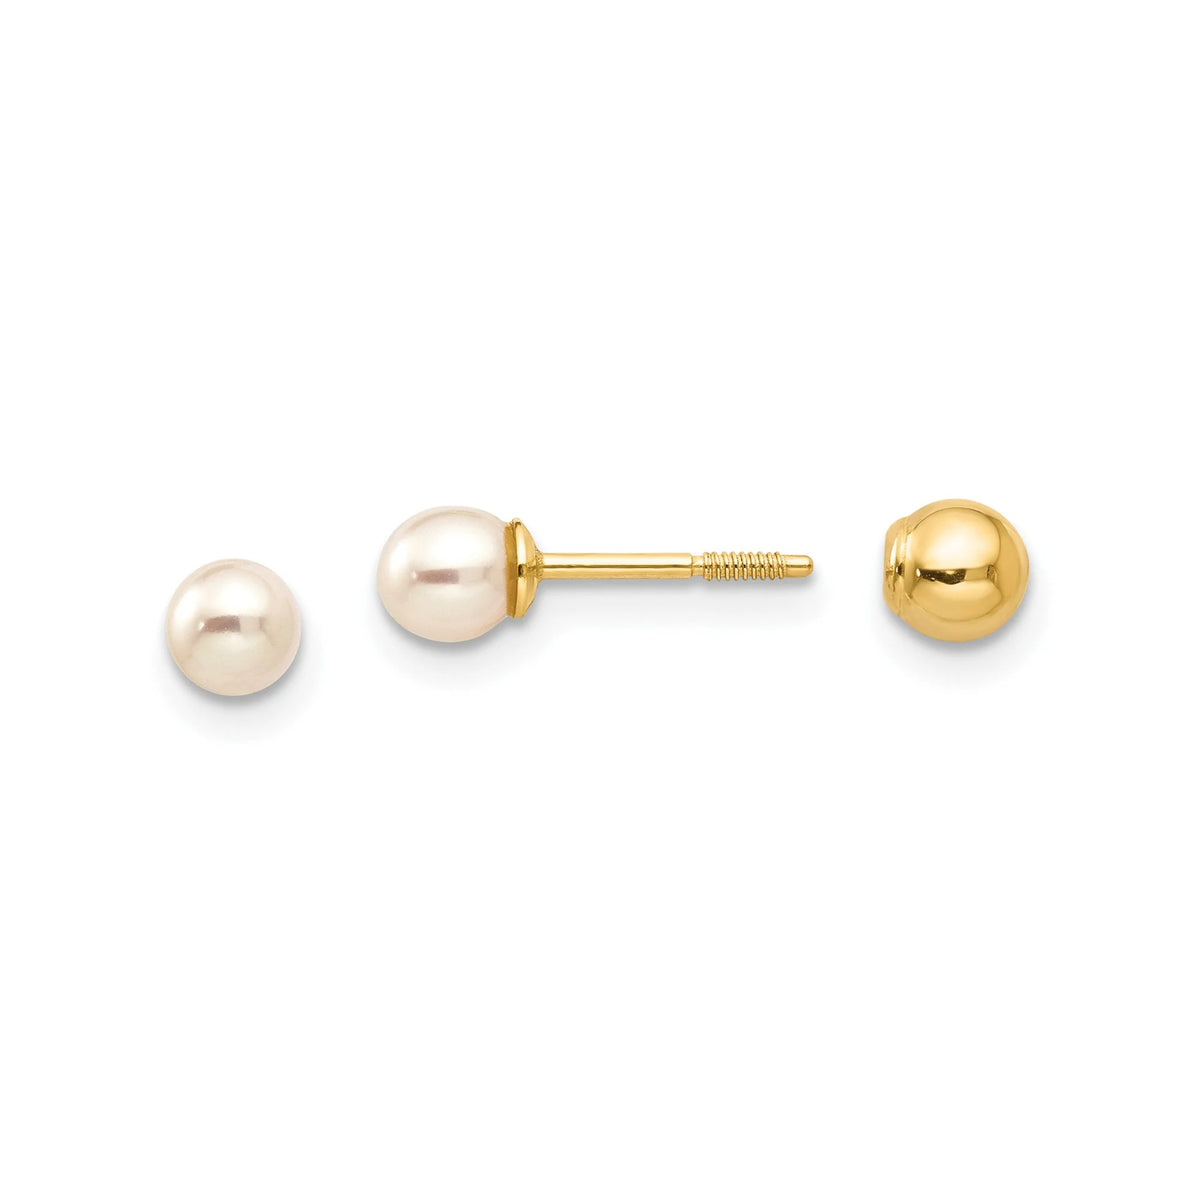 14k Yellow Gold Reversible Pearl and Gold Ball Earrings 4mm Fresh Water Cultured Pearl Studs Gift Box Included - Made in USA 1 Size Fits All